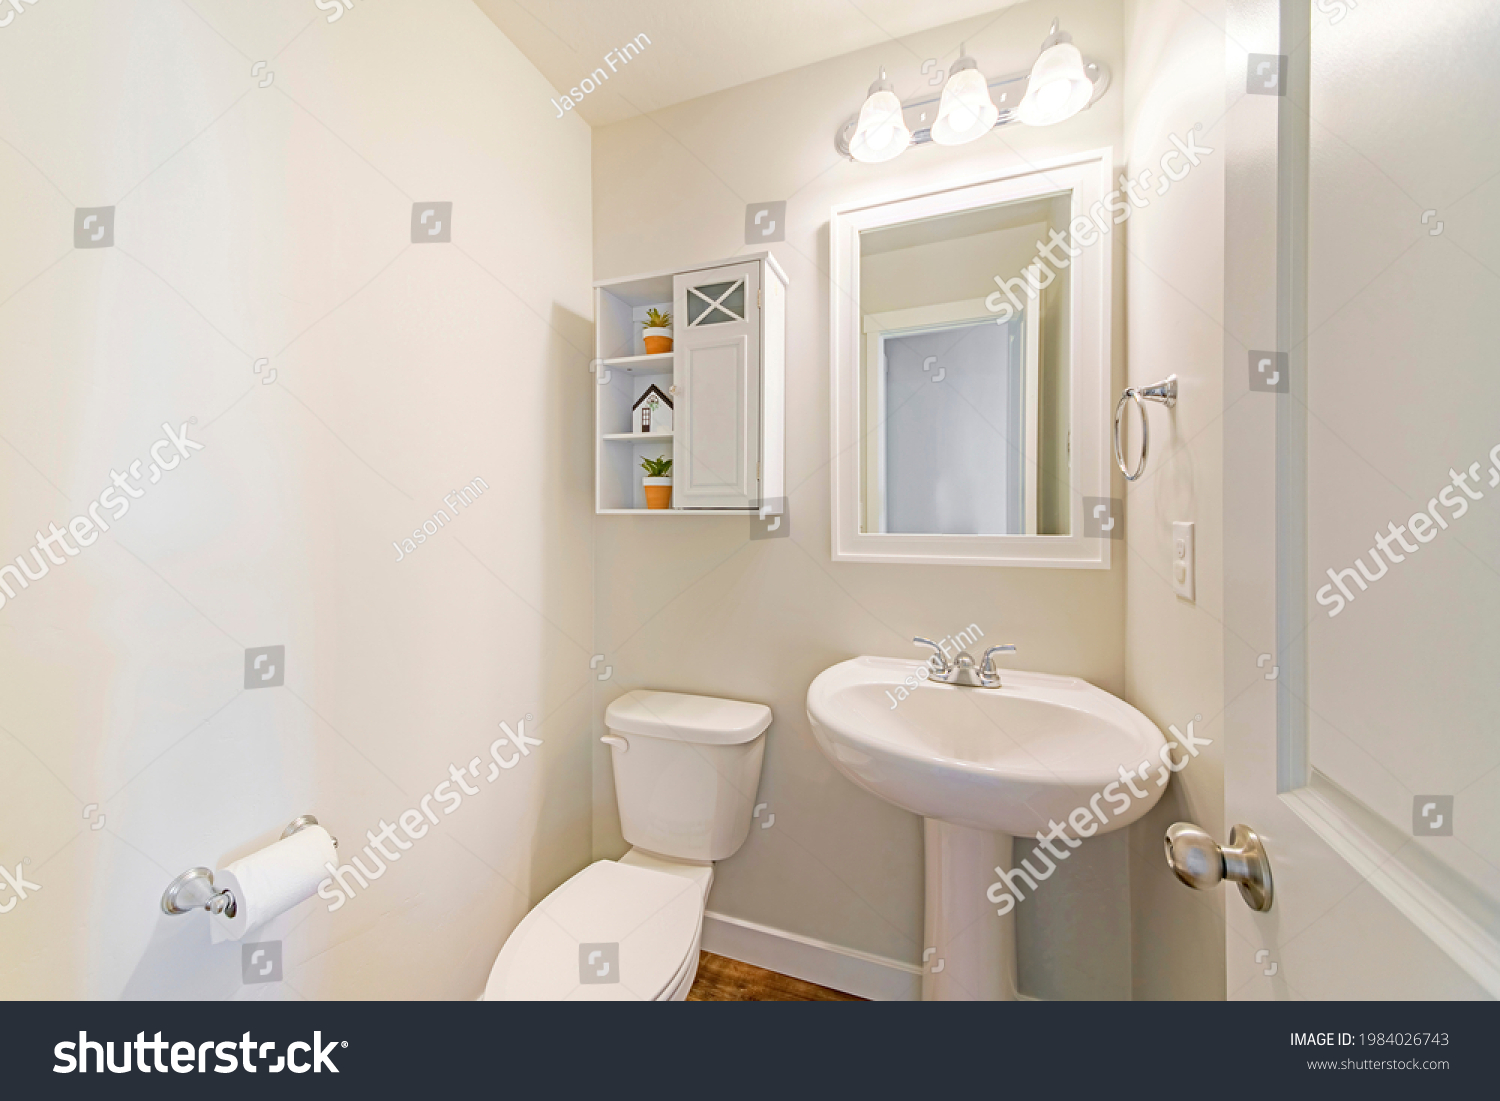 Interior of a white powder room with minimalist design. Toilet with ceramic bowl and sink with white wooden framed mirror beside the small white wooden cabinet and shelves with plants and house decor. #1984026743